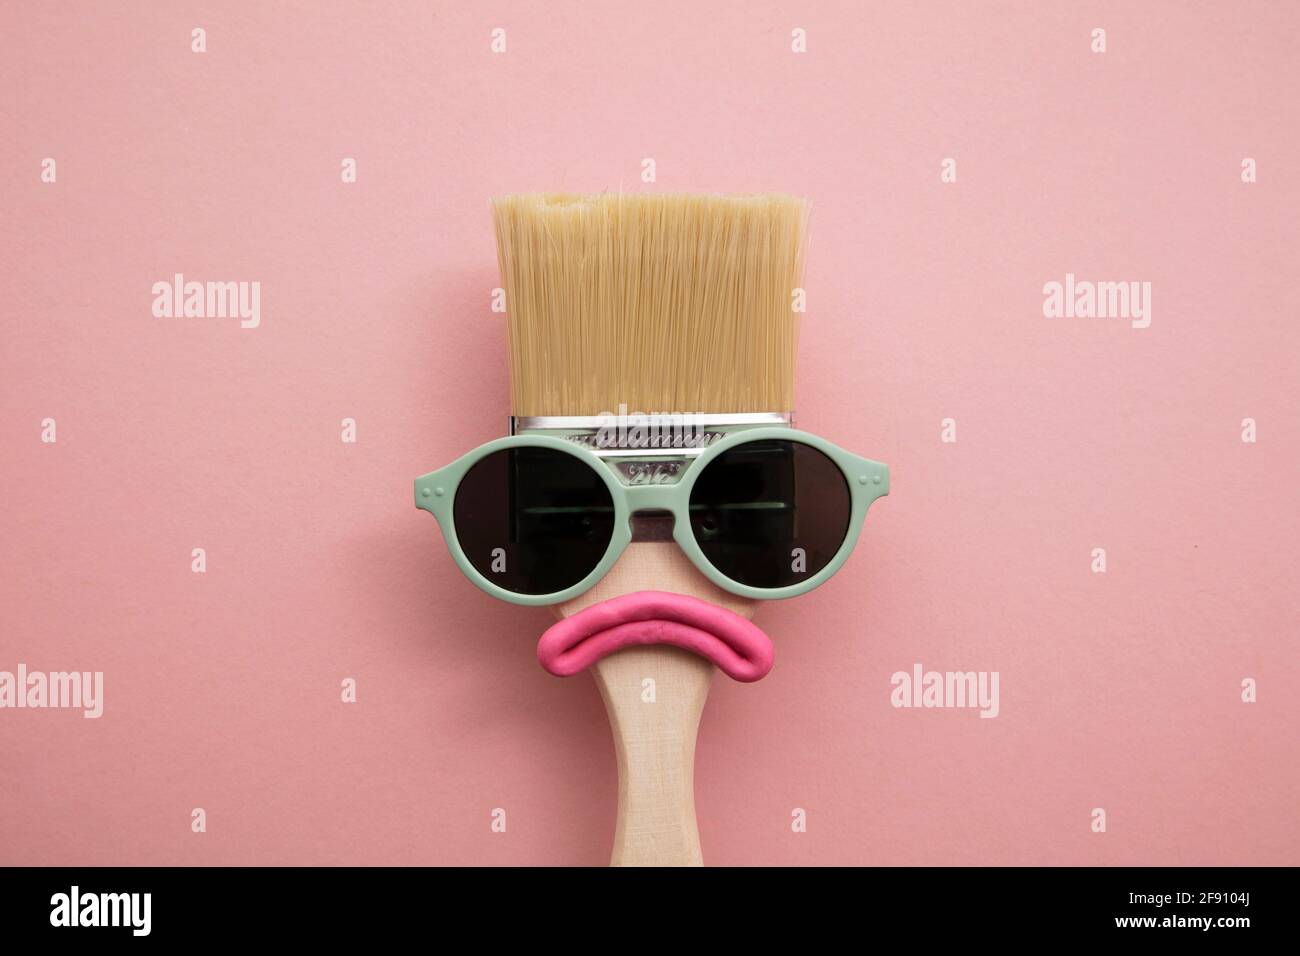 Paint brush diy character with sunglasses and sad face Stock Photo